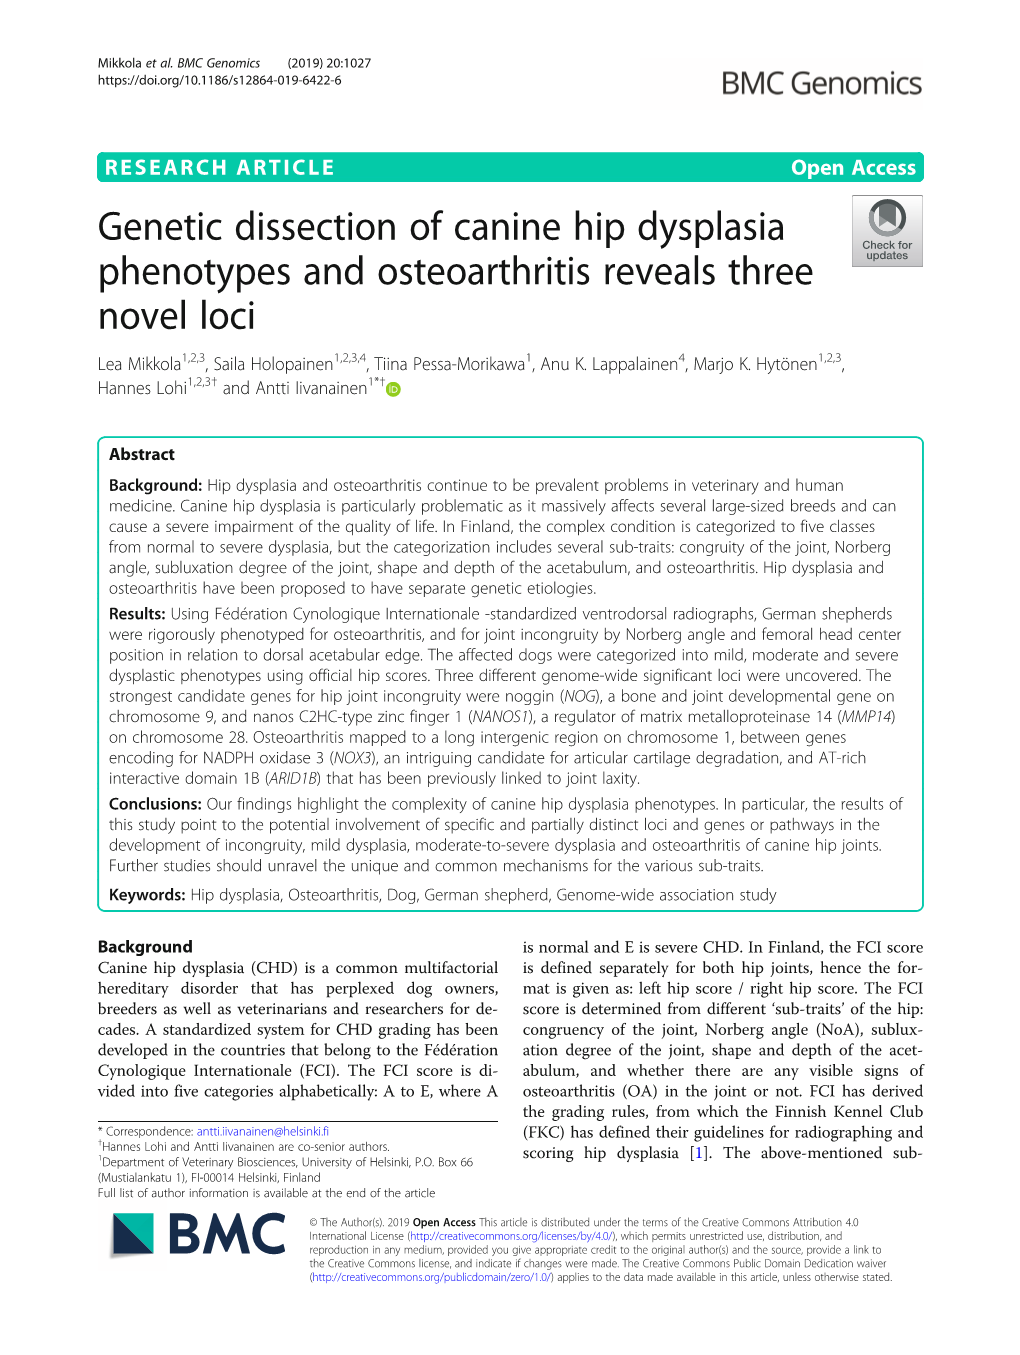 Genetic Dissection of Canine Hip Dysplasia Phenotypes And